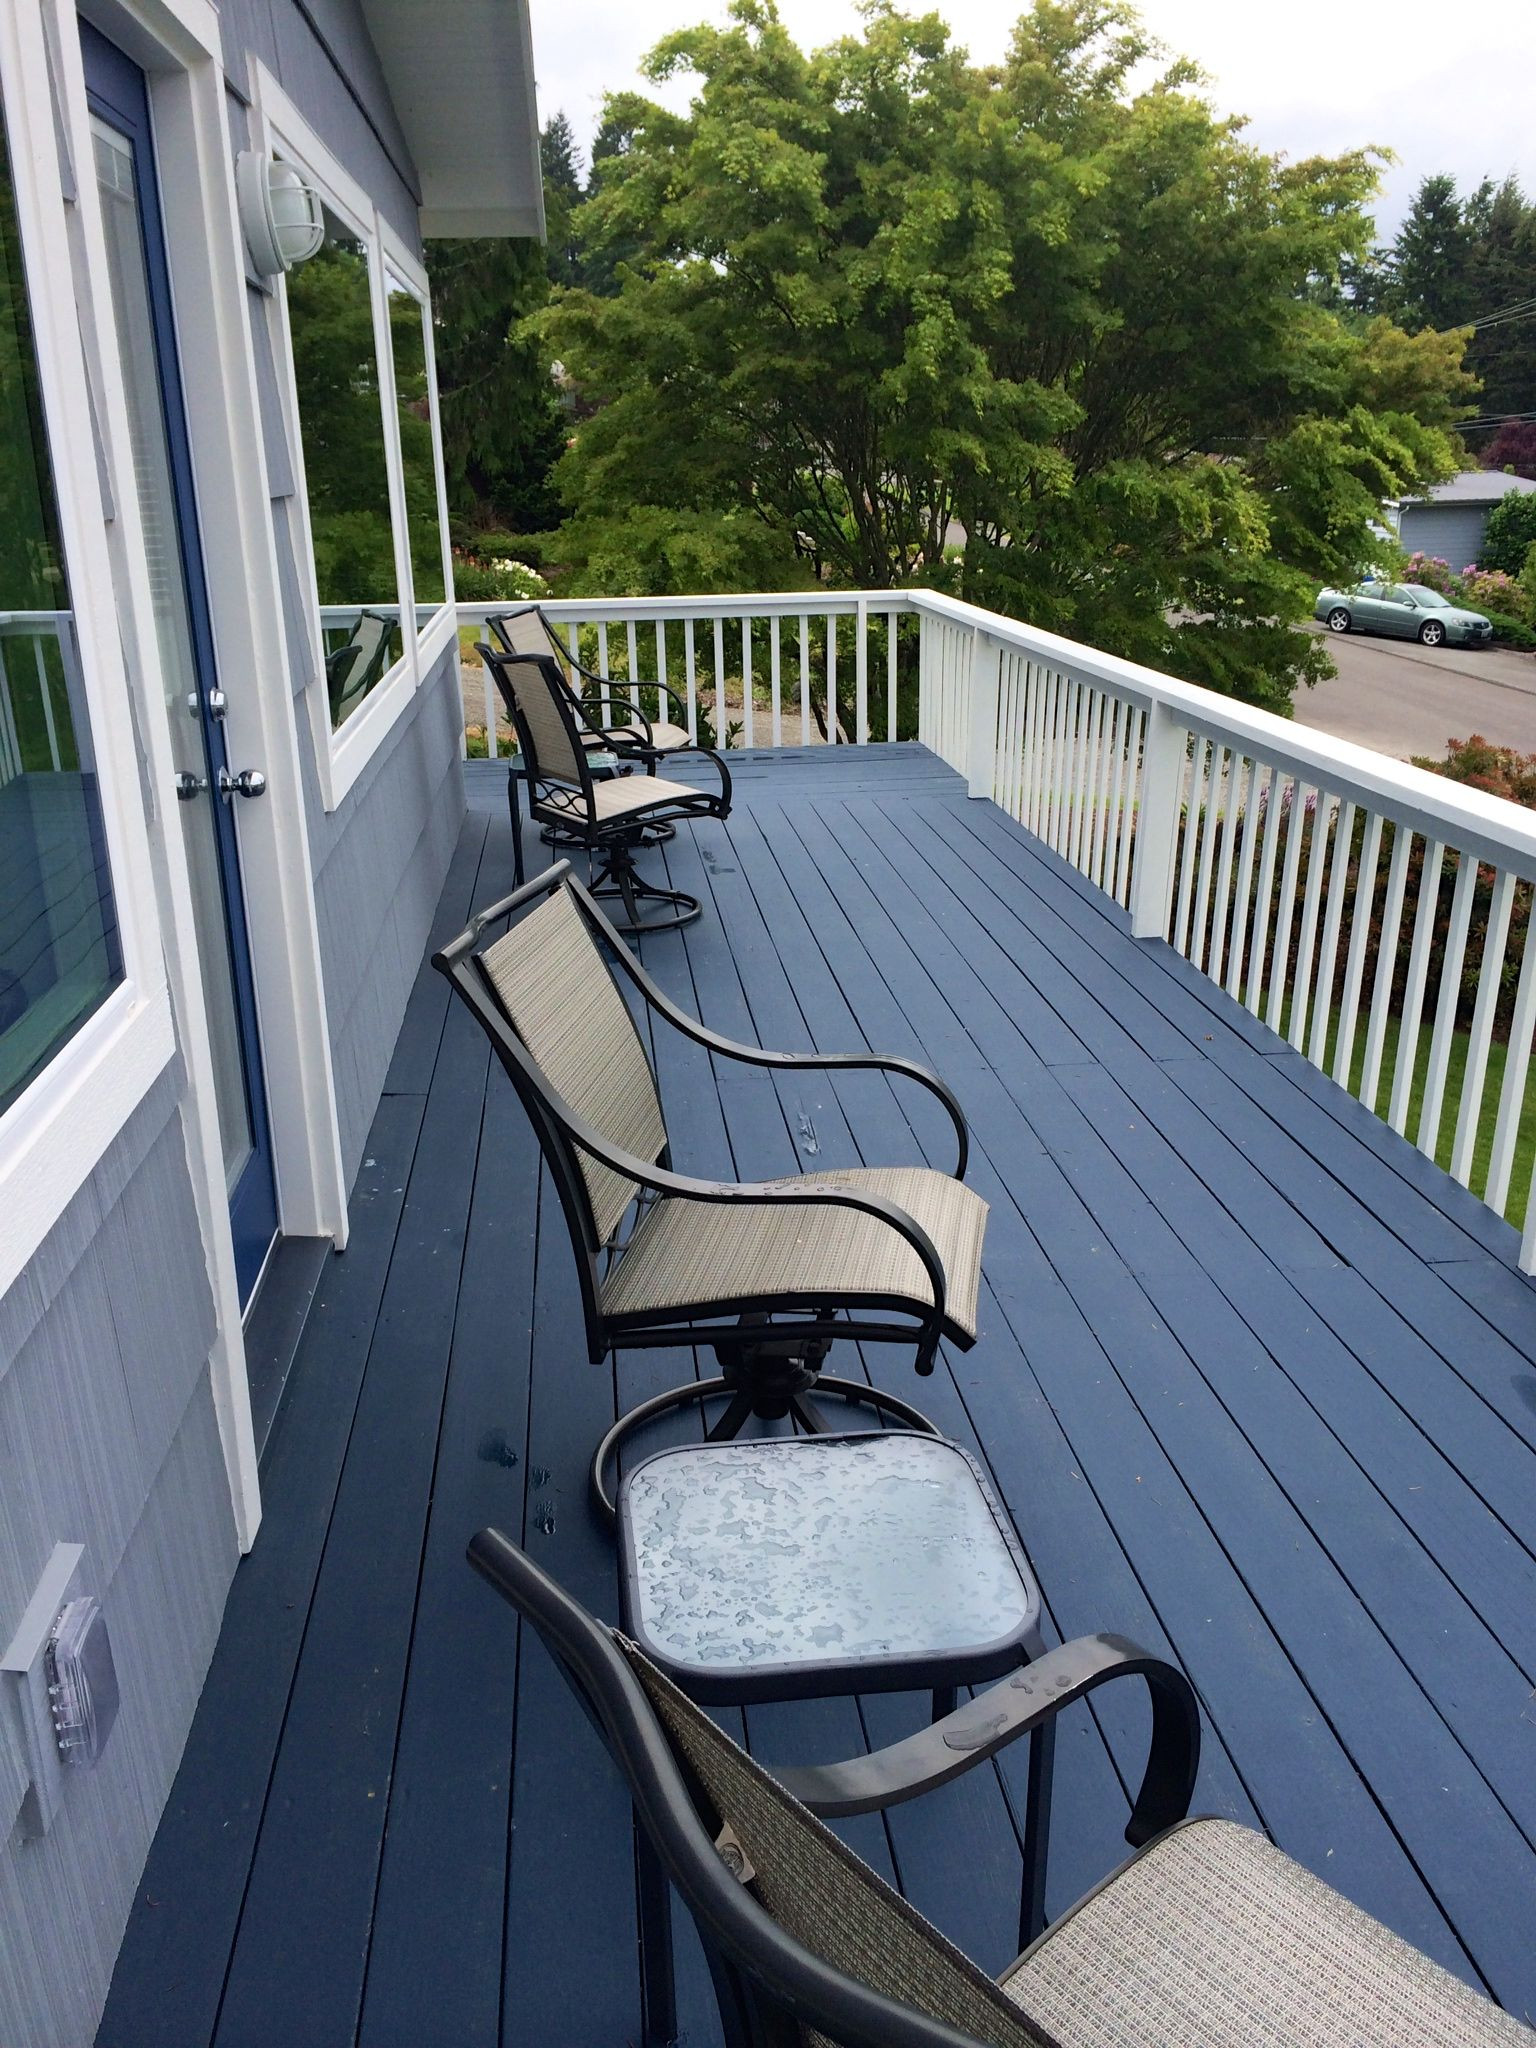 Behr Deck Paint Colors
 After we did this project about a year and a half ago